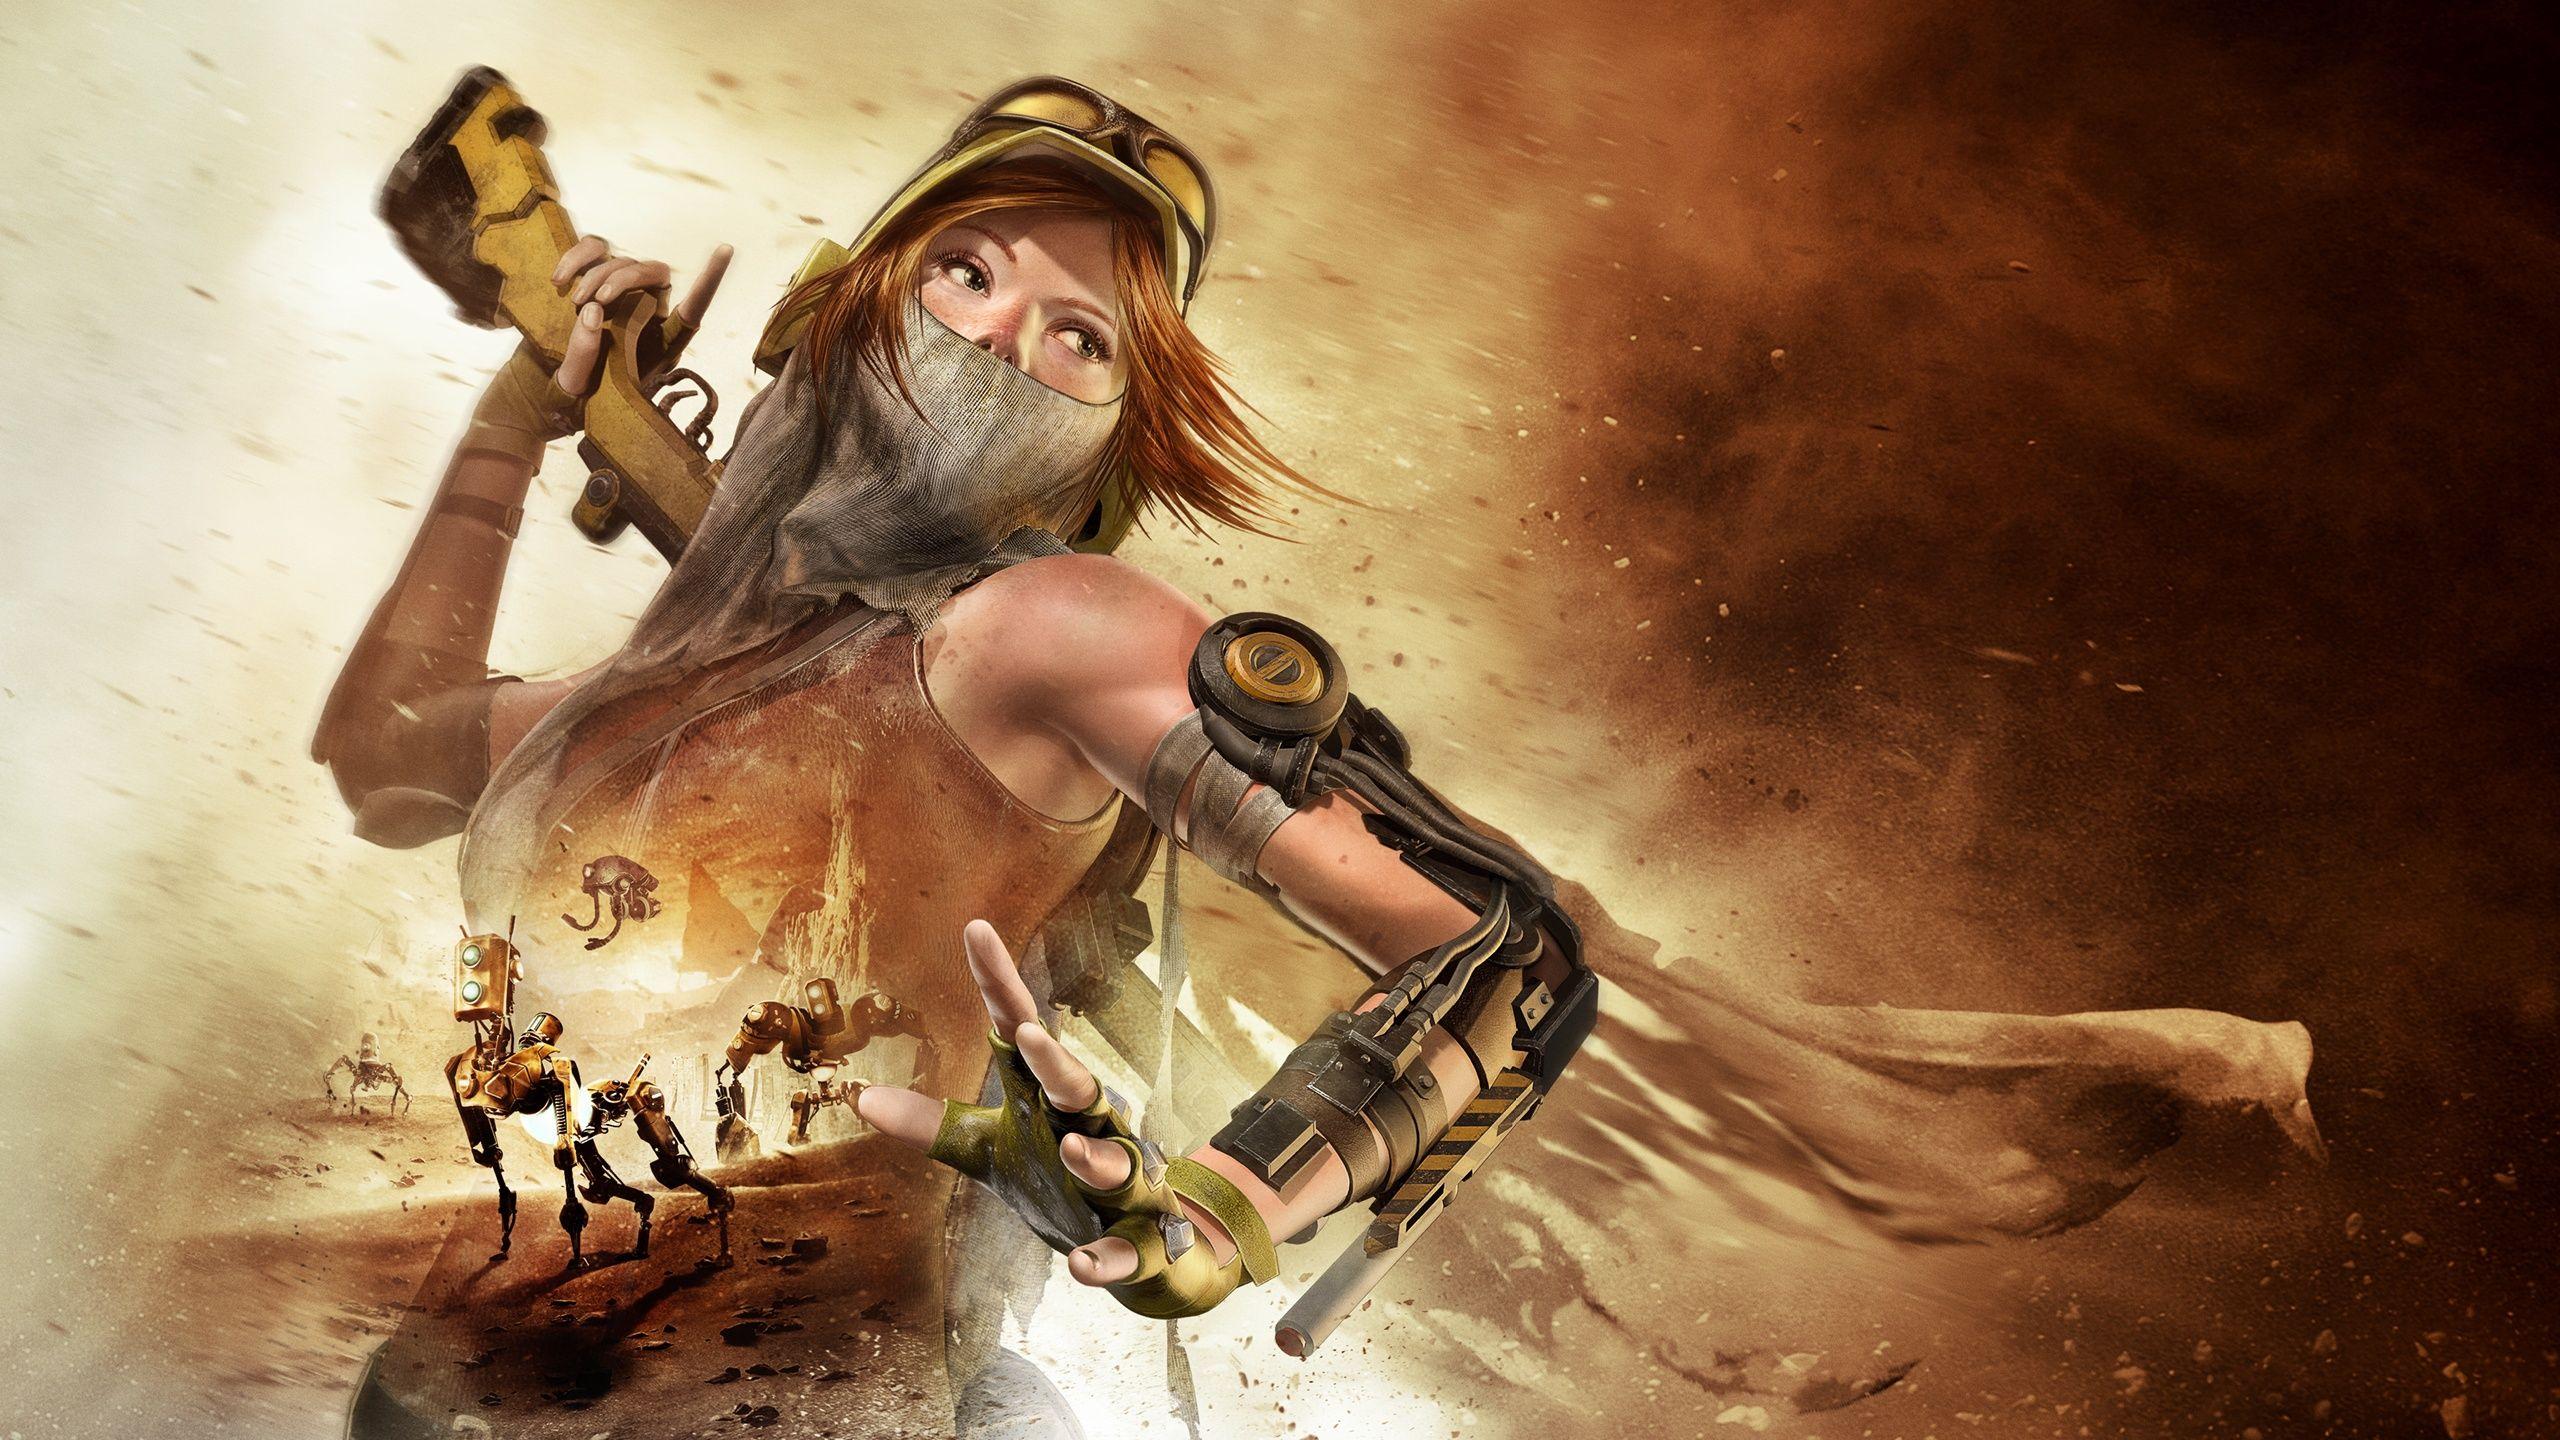 ReCore HD Xbox One Wallpaper in jpg format for free download